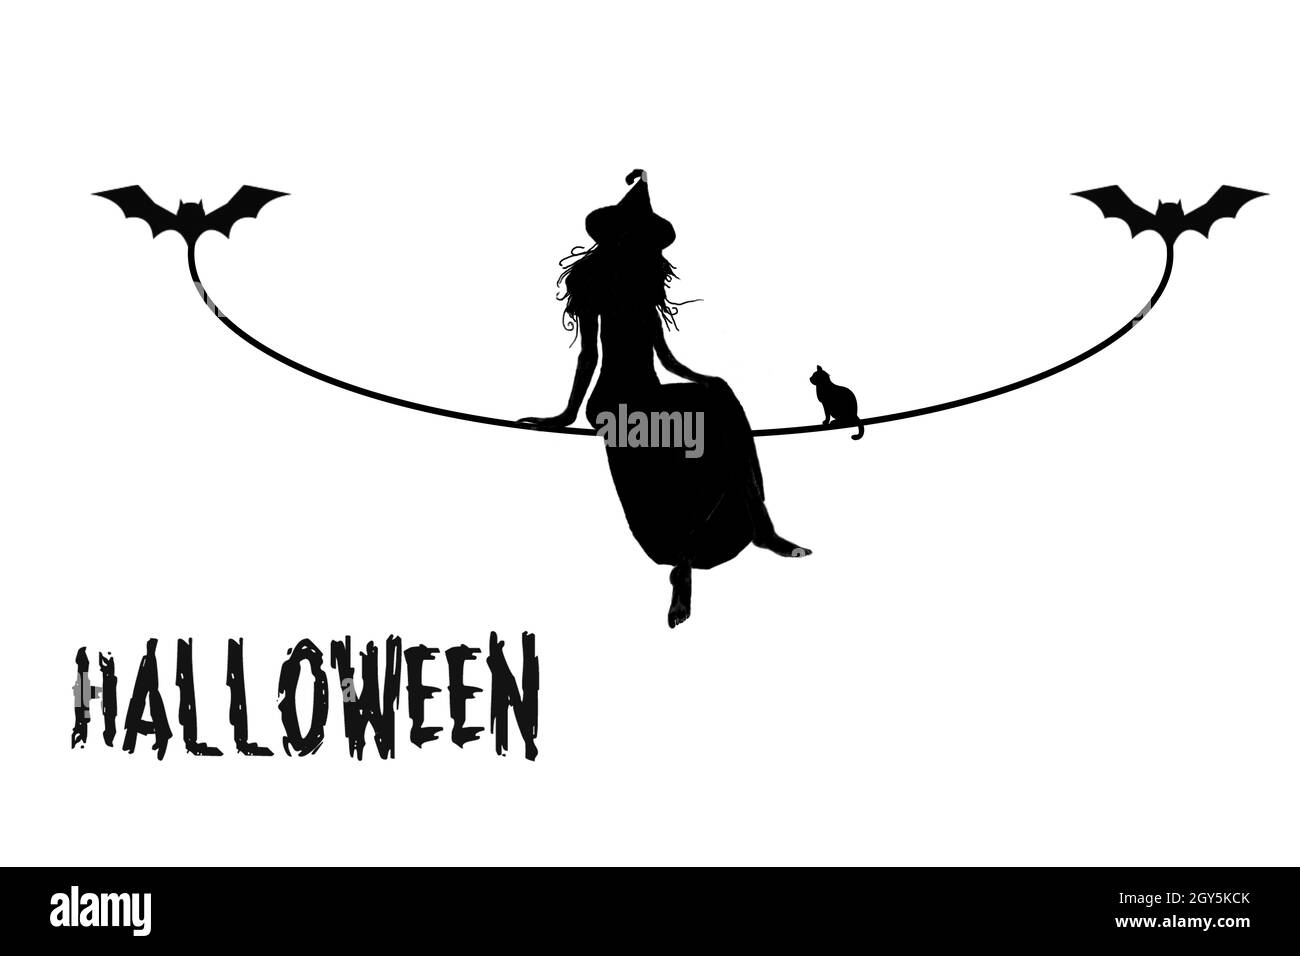 Halloween Concept isolated on a white background. Stock Photo